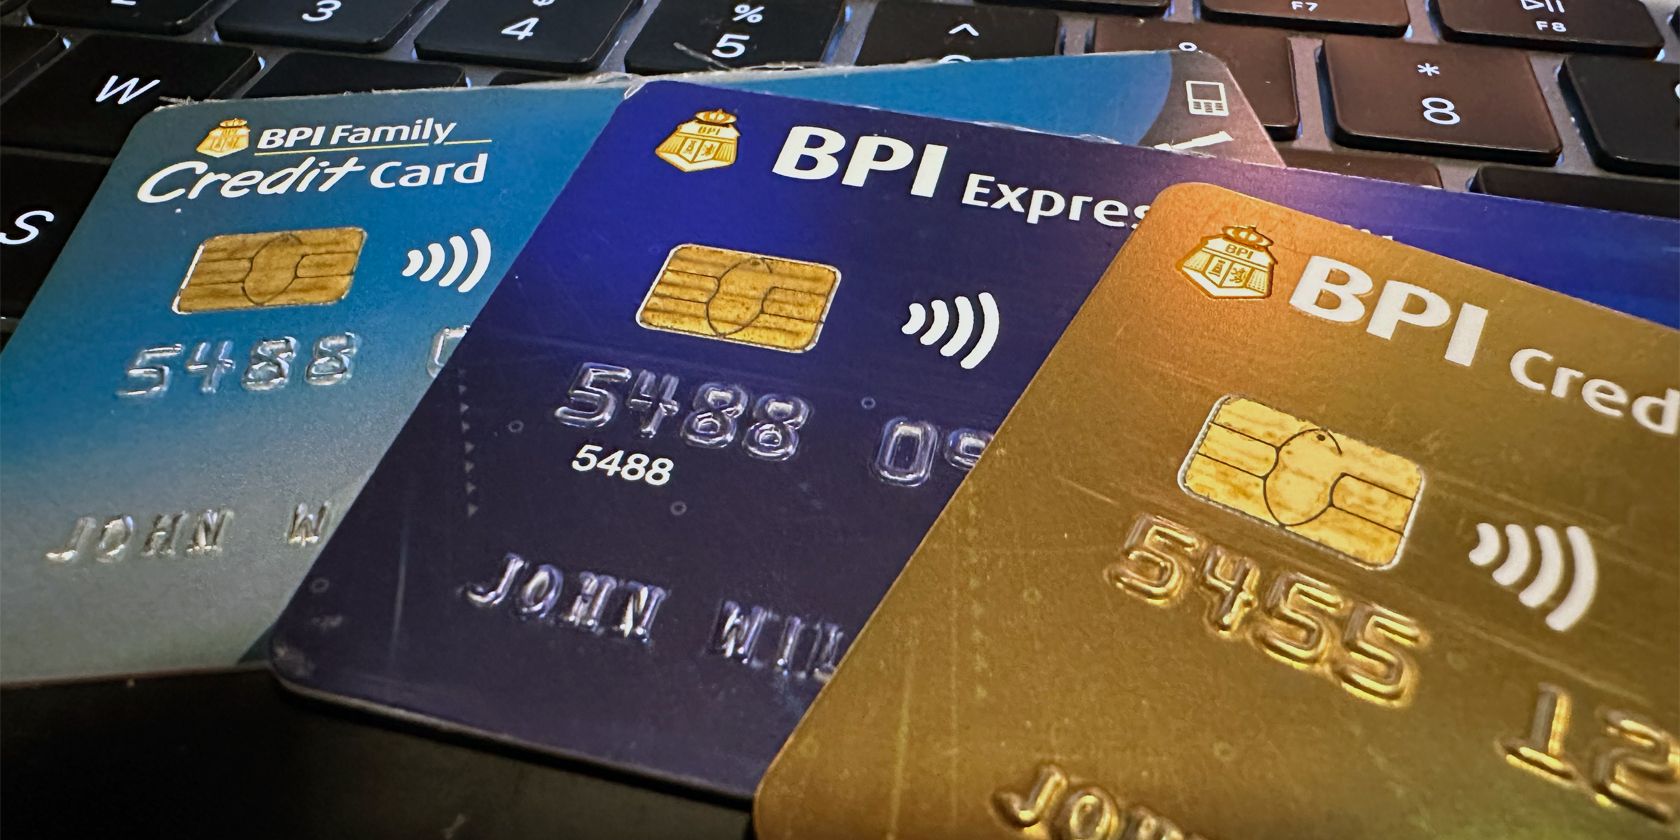 Bank cards with an NFC logo